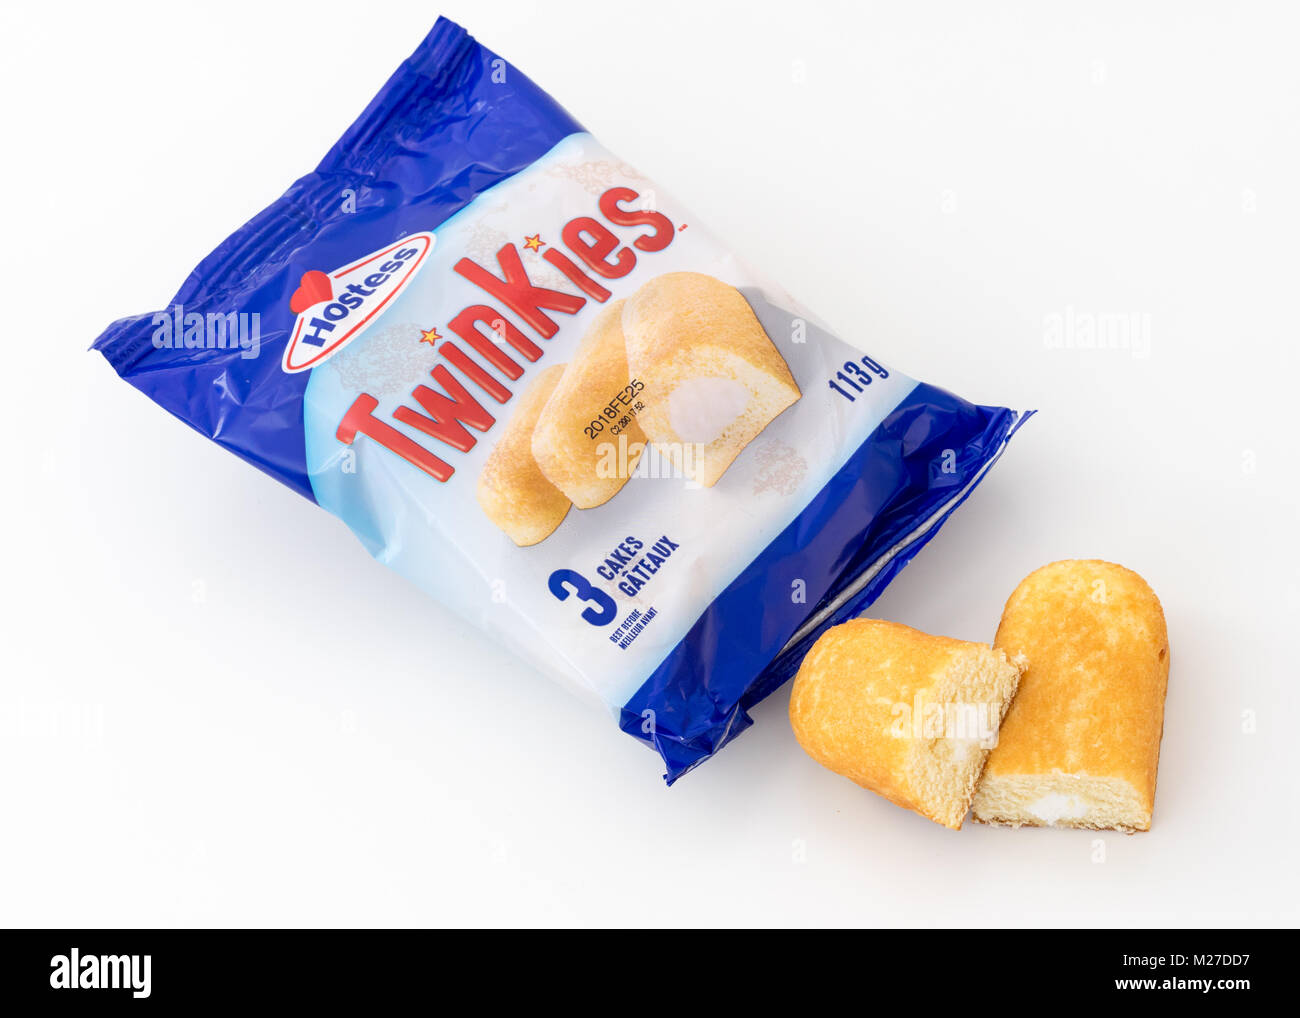 Twinkies (Twinkie) are a renowned American snack cake. Stock Photo